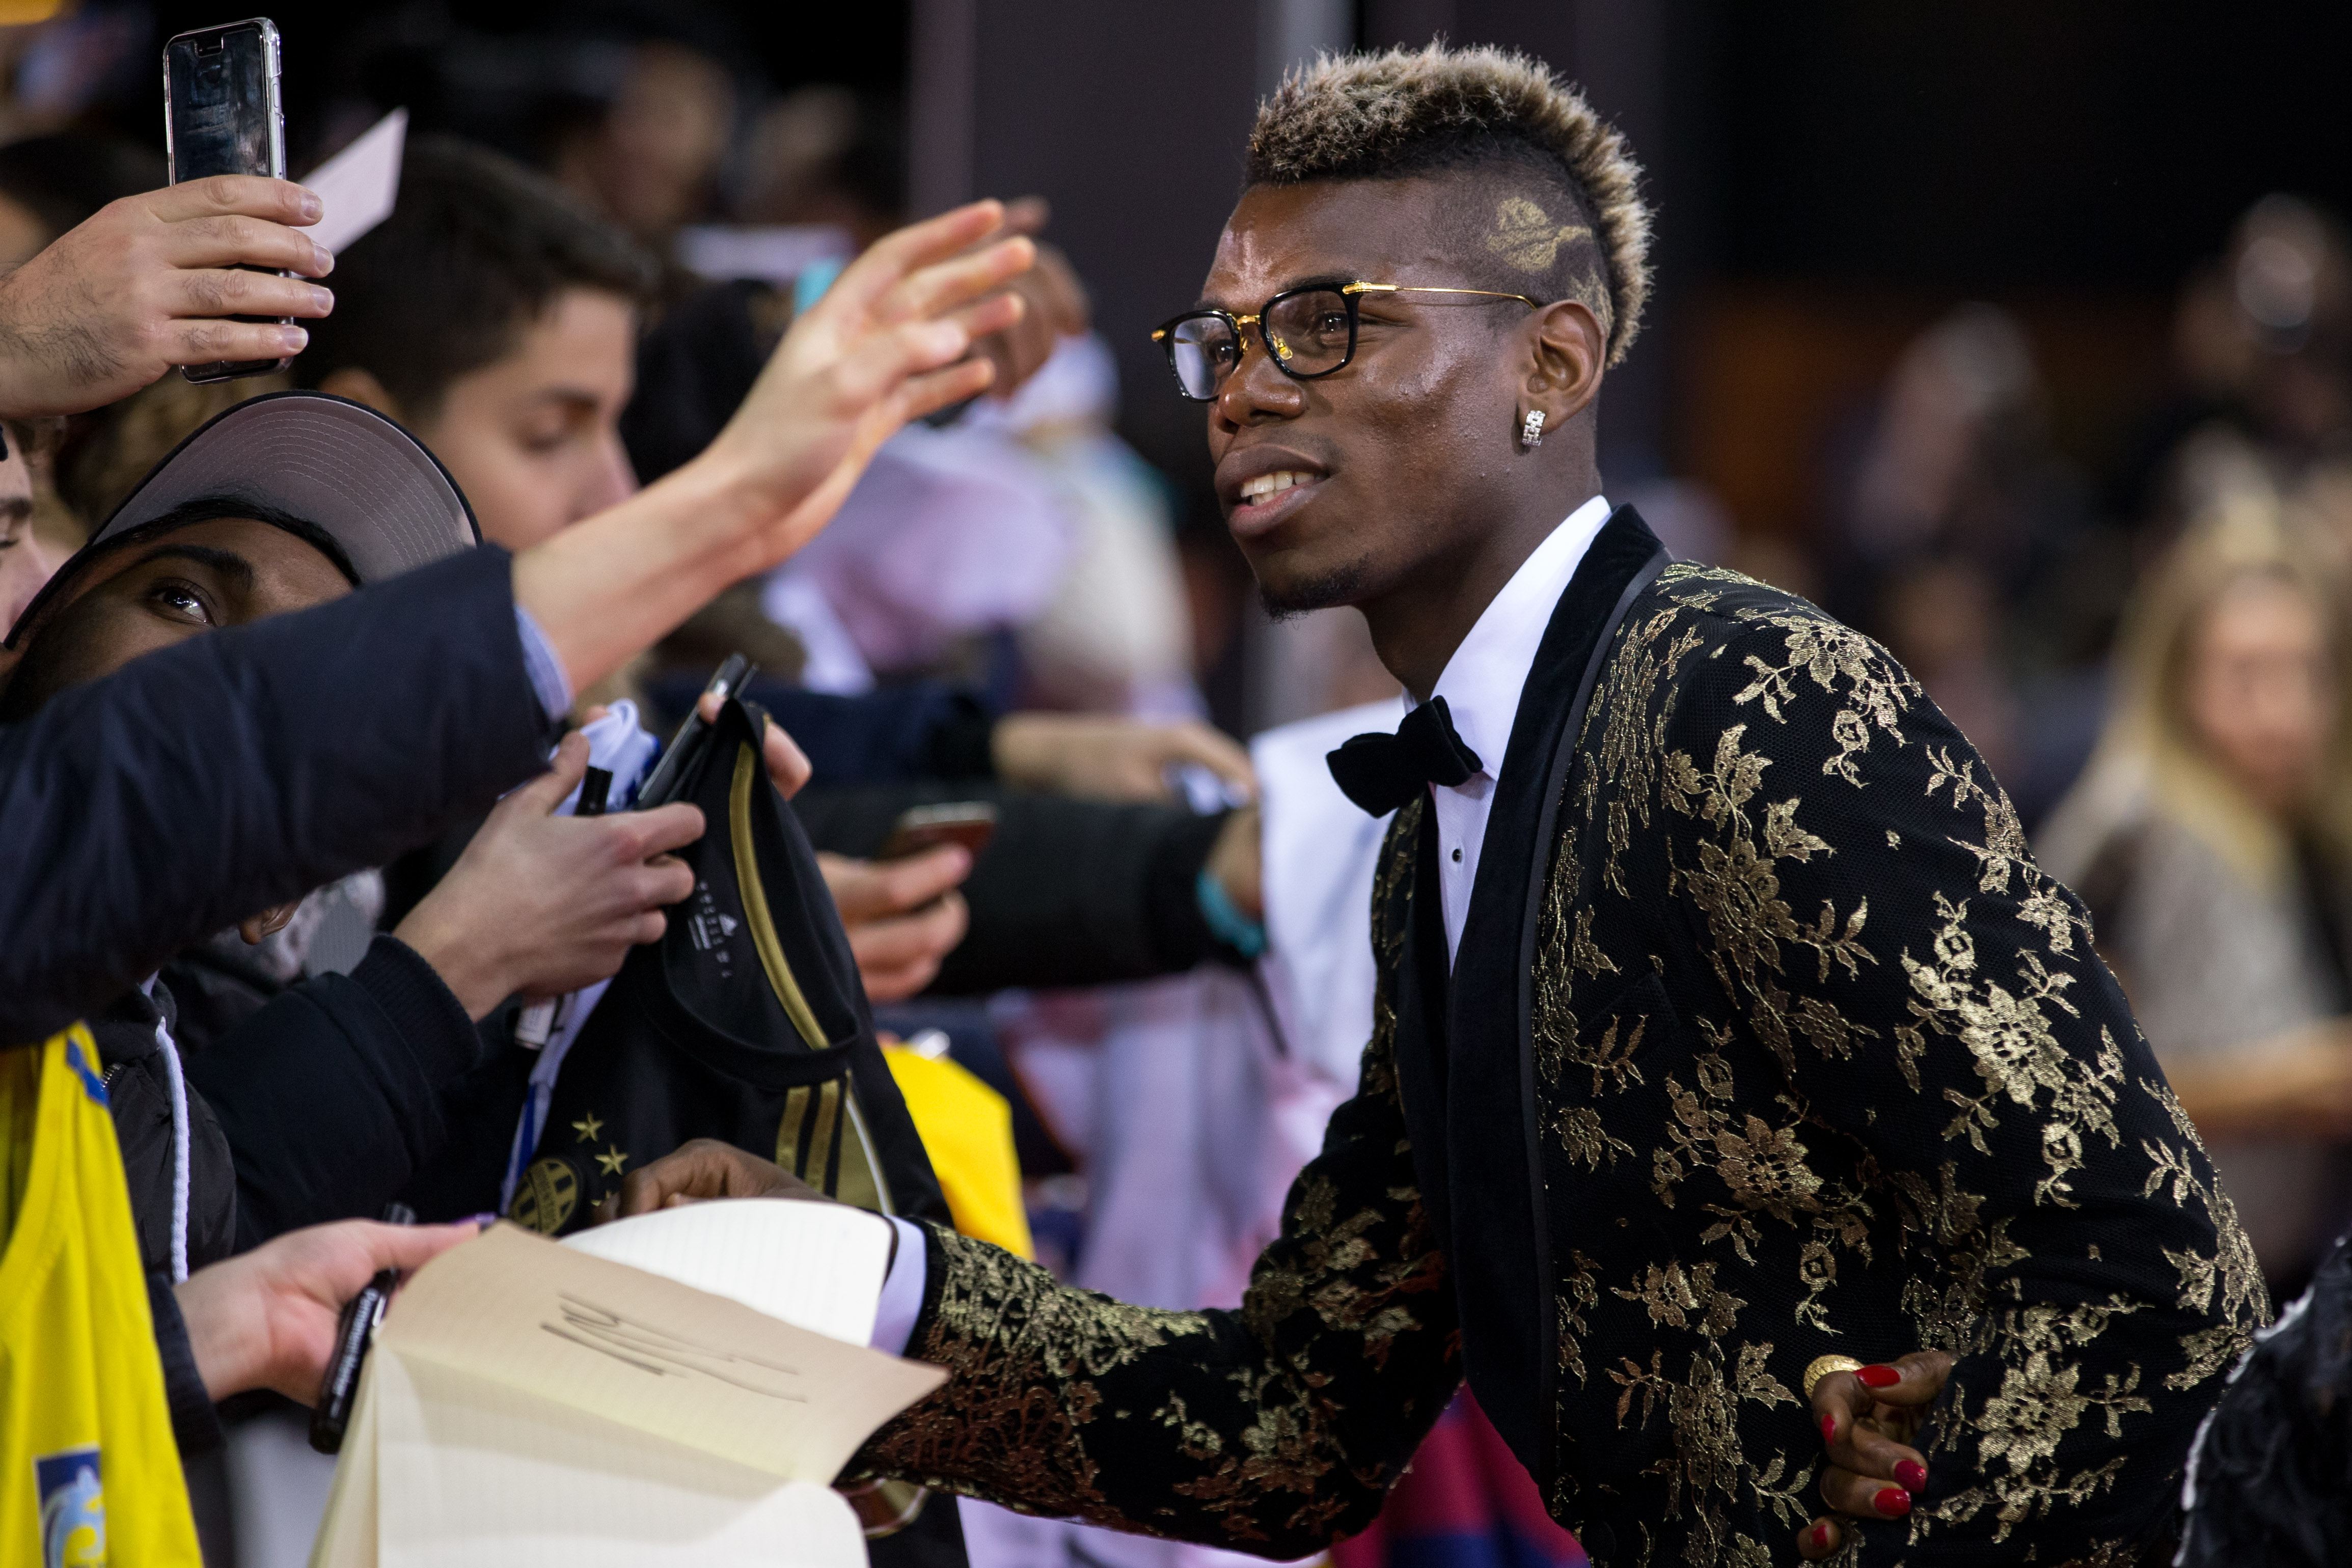 ZURICH, SWITZERLAND - JANUARY 11: Paul Pogba arrives for the FIFA Ballon d'Or Gala 2015 at the Kongresshaus on January 11, 2016 in Zurich, Switzerland. (Photo by Philipp Schmidli/Getty Images)